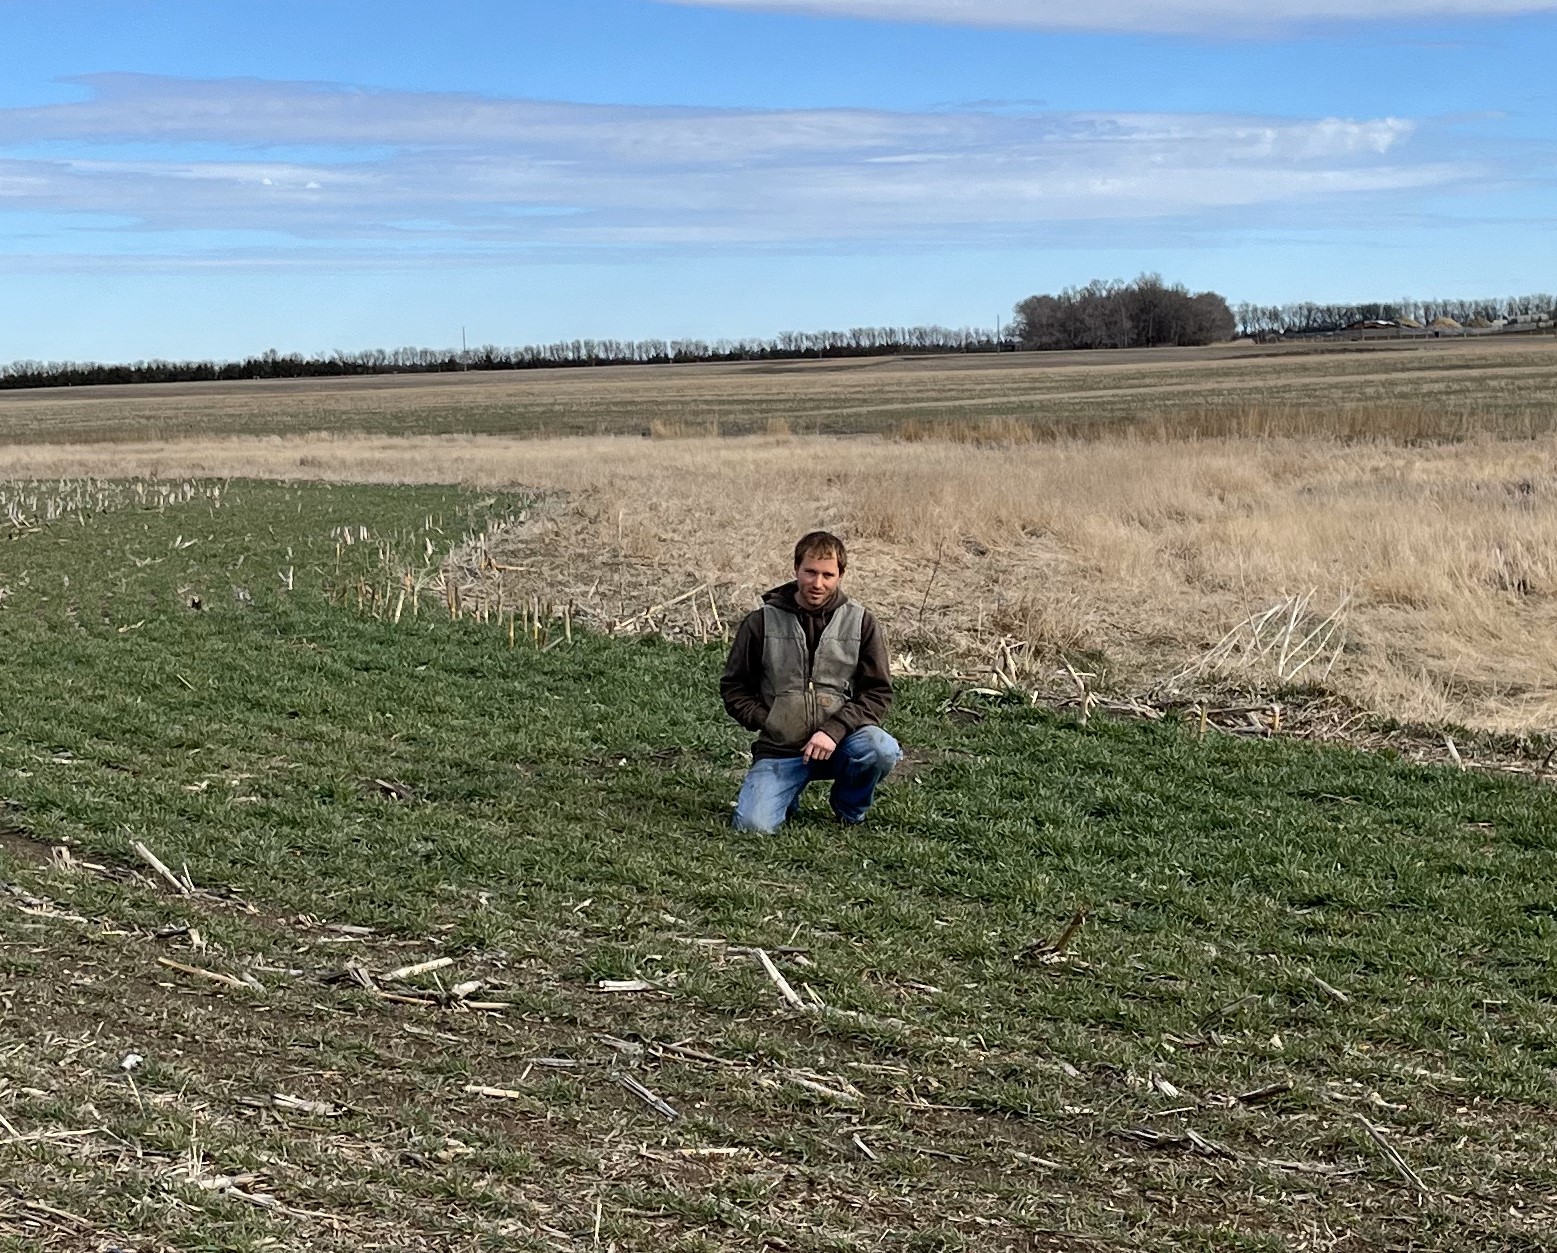 South Dakota farmer poses in a rye field - which he planted to help improve his land during the winter months.